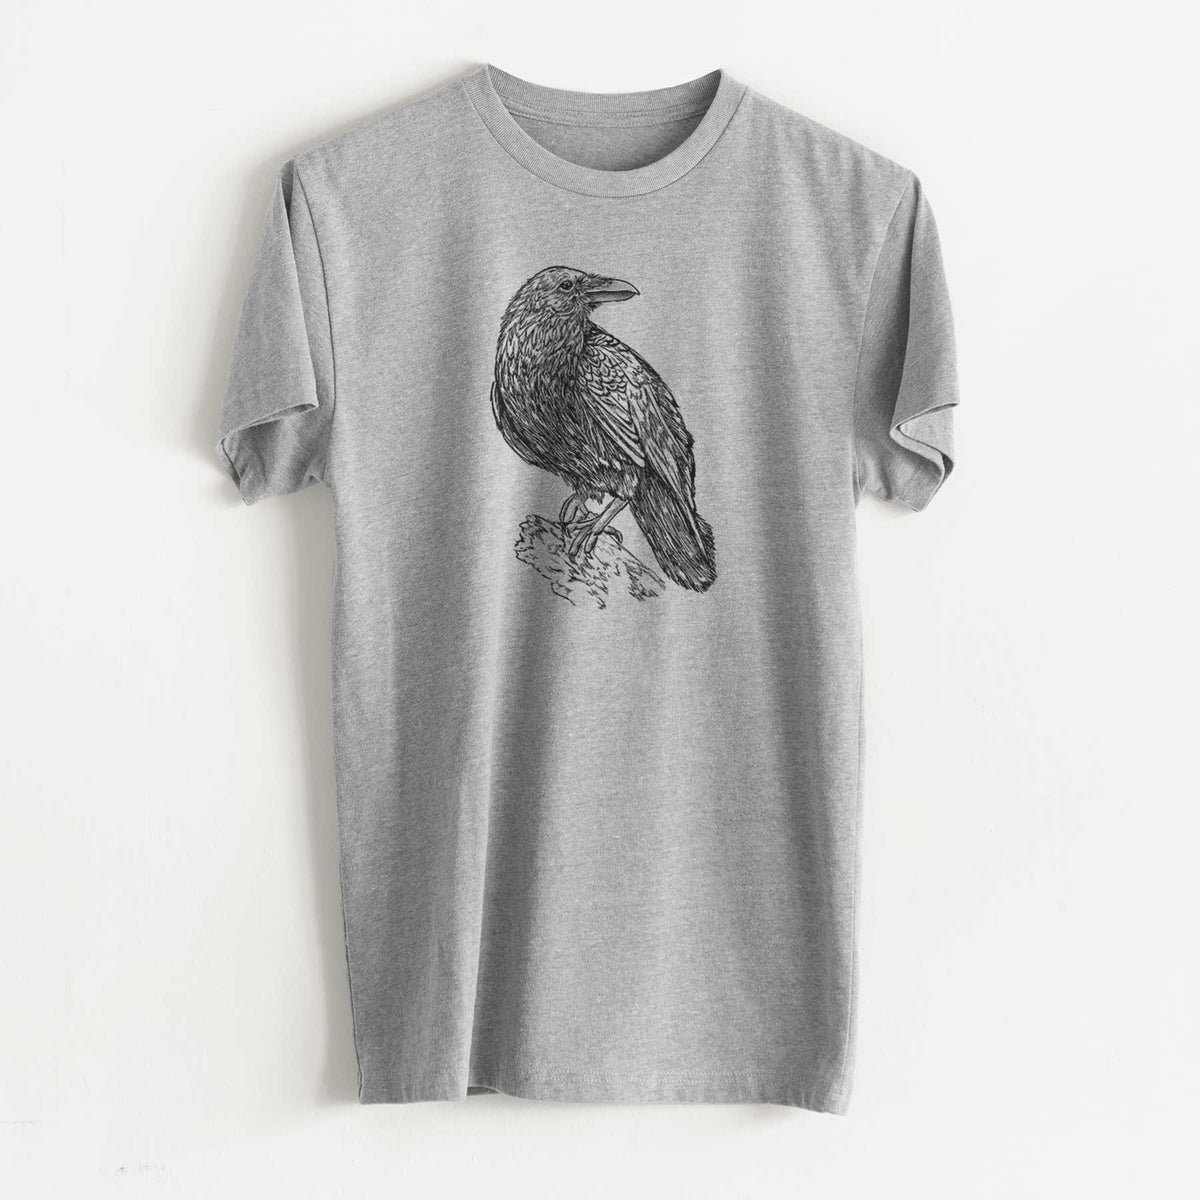 Corvus corax - Common Raven - Unisex Recycled Eco Tee  - CLOSEOUT - FINAL SALE